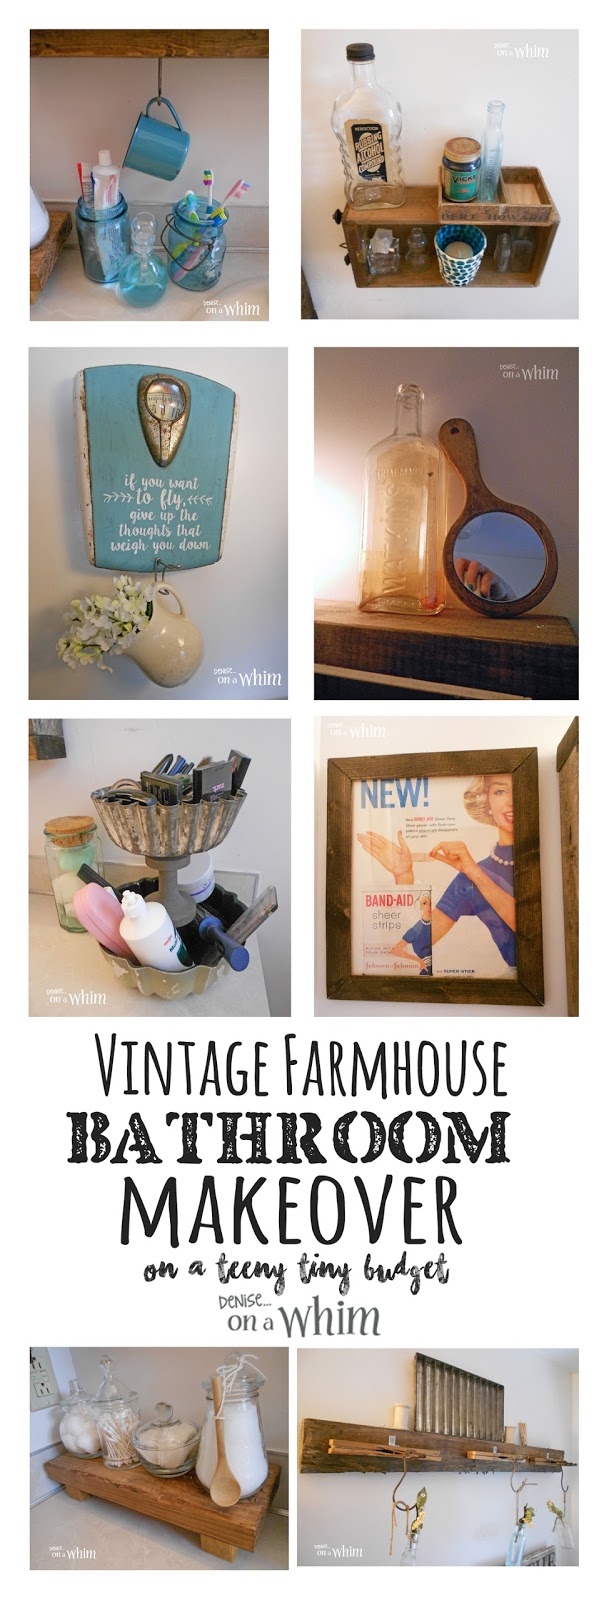 Vintage Farmhouse Bathroom Makeover on a Small Budget | Denise on a Whim